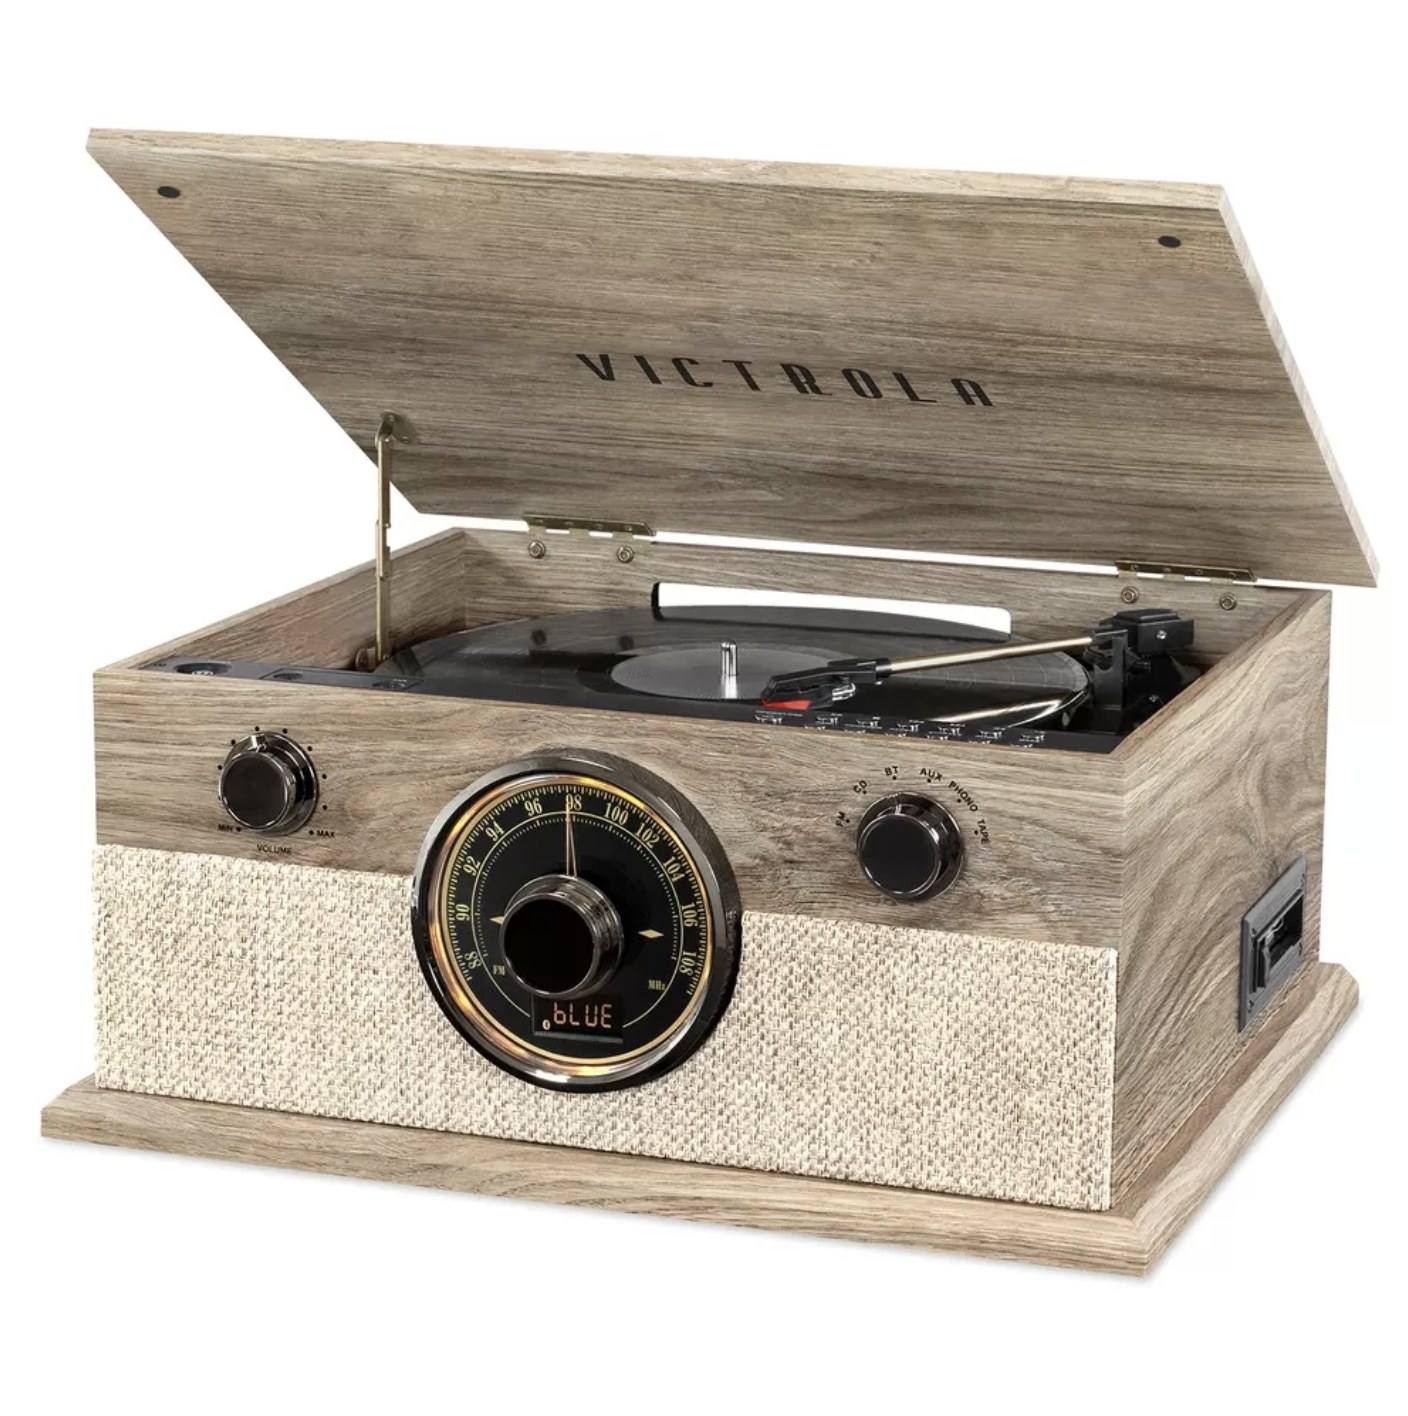 A wooden Bluetooth record player